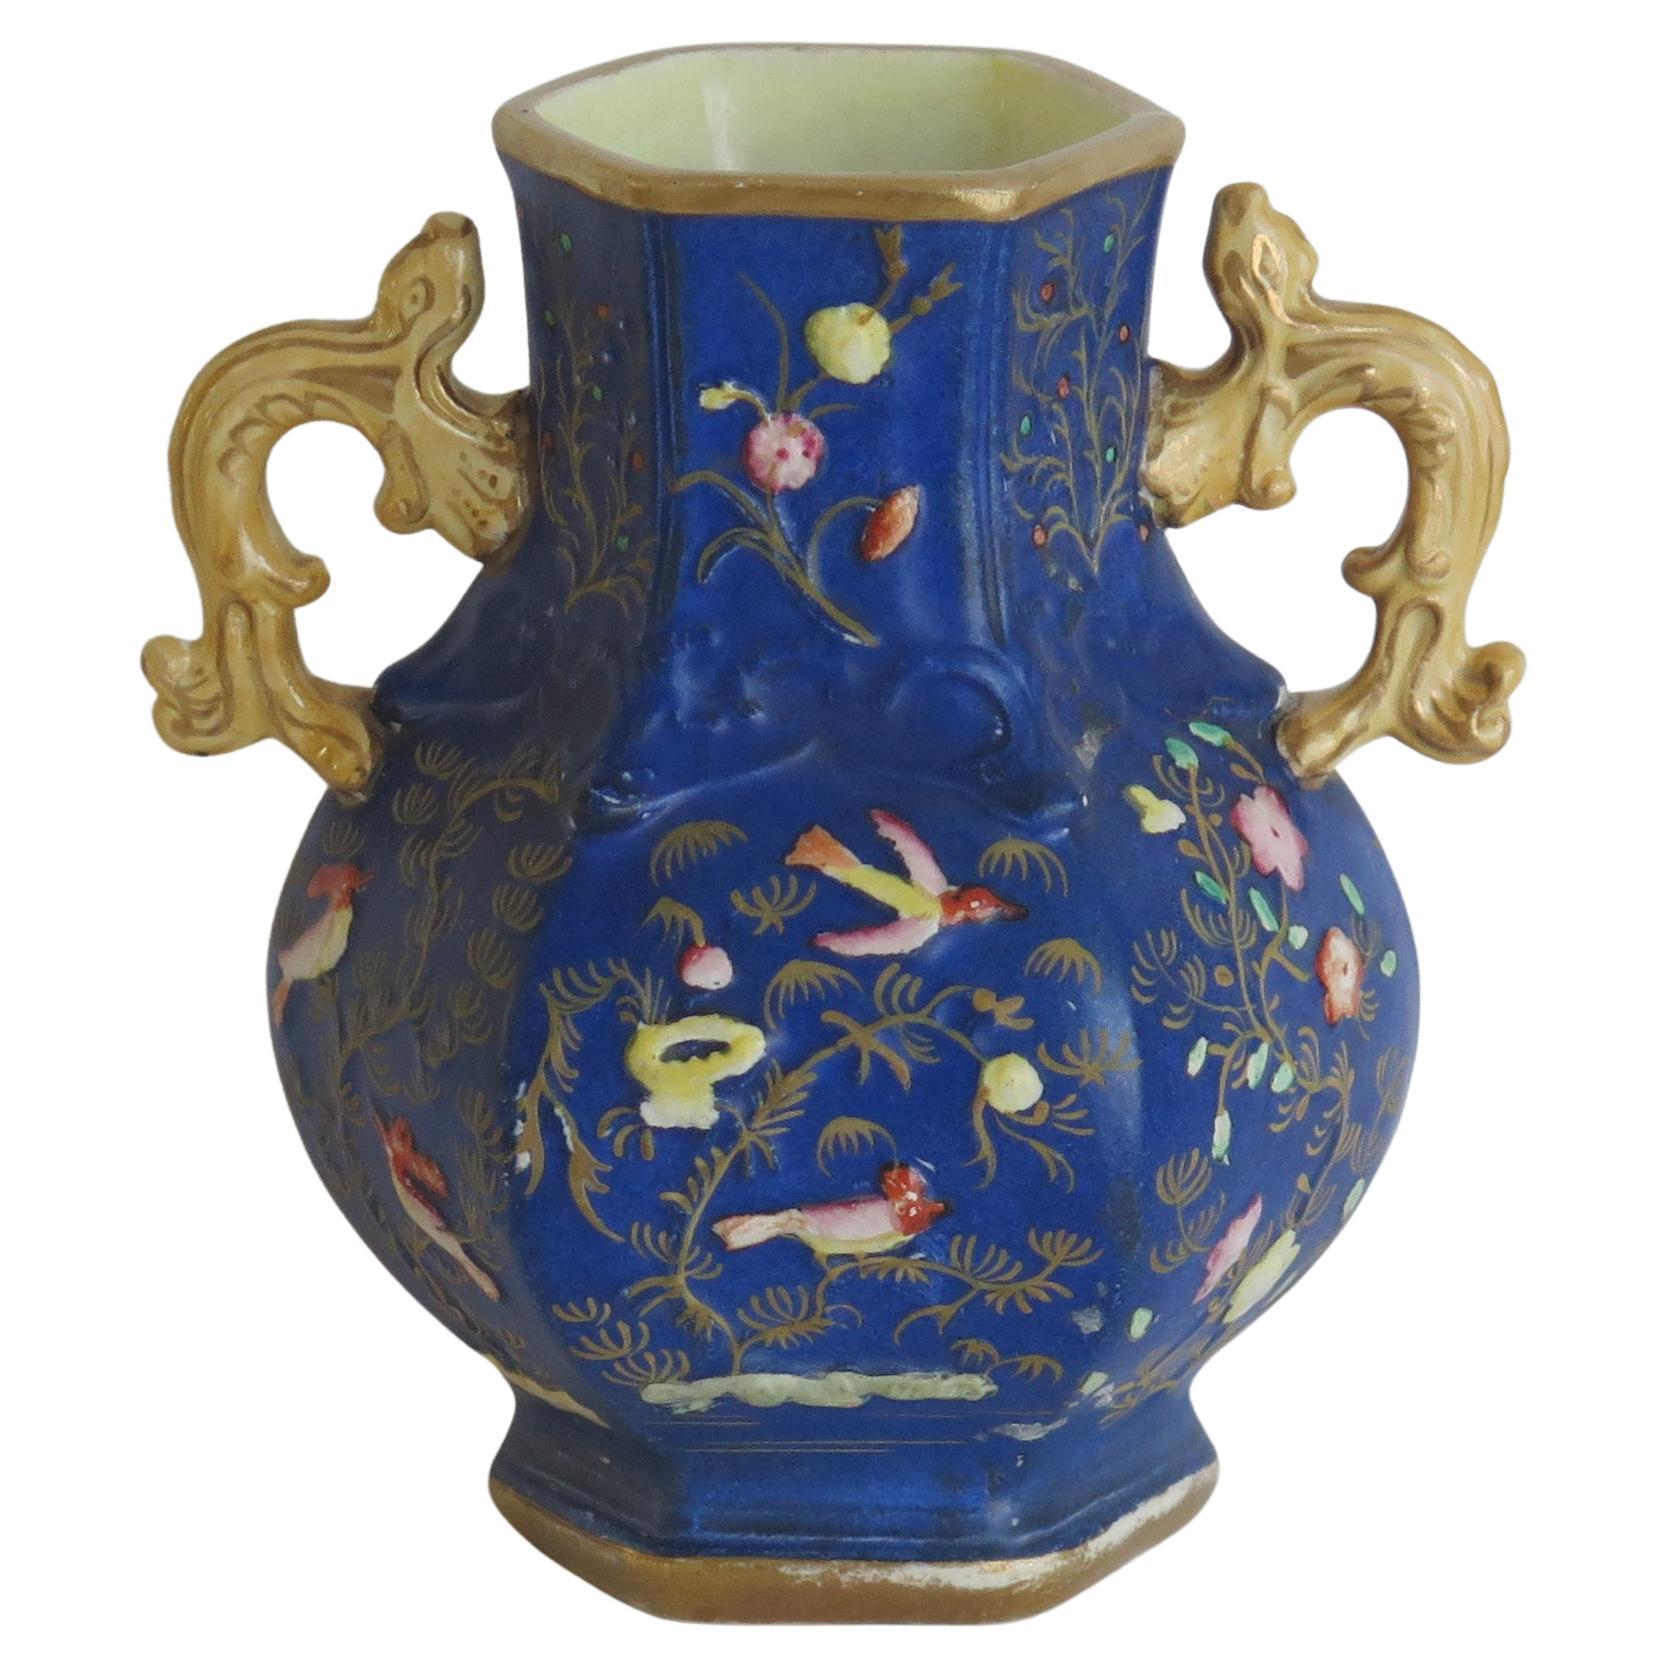 Mason's Ironstone Vase in a Rare Relief Moulded Pattern, English, circa 1840